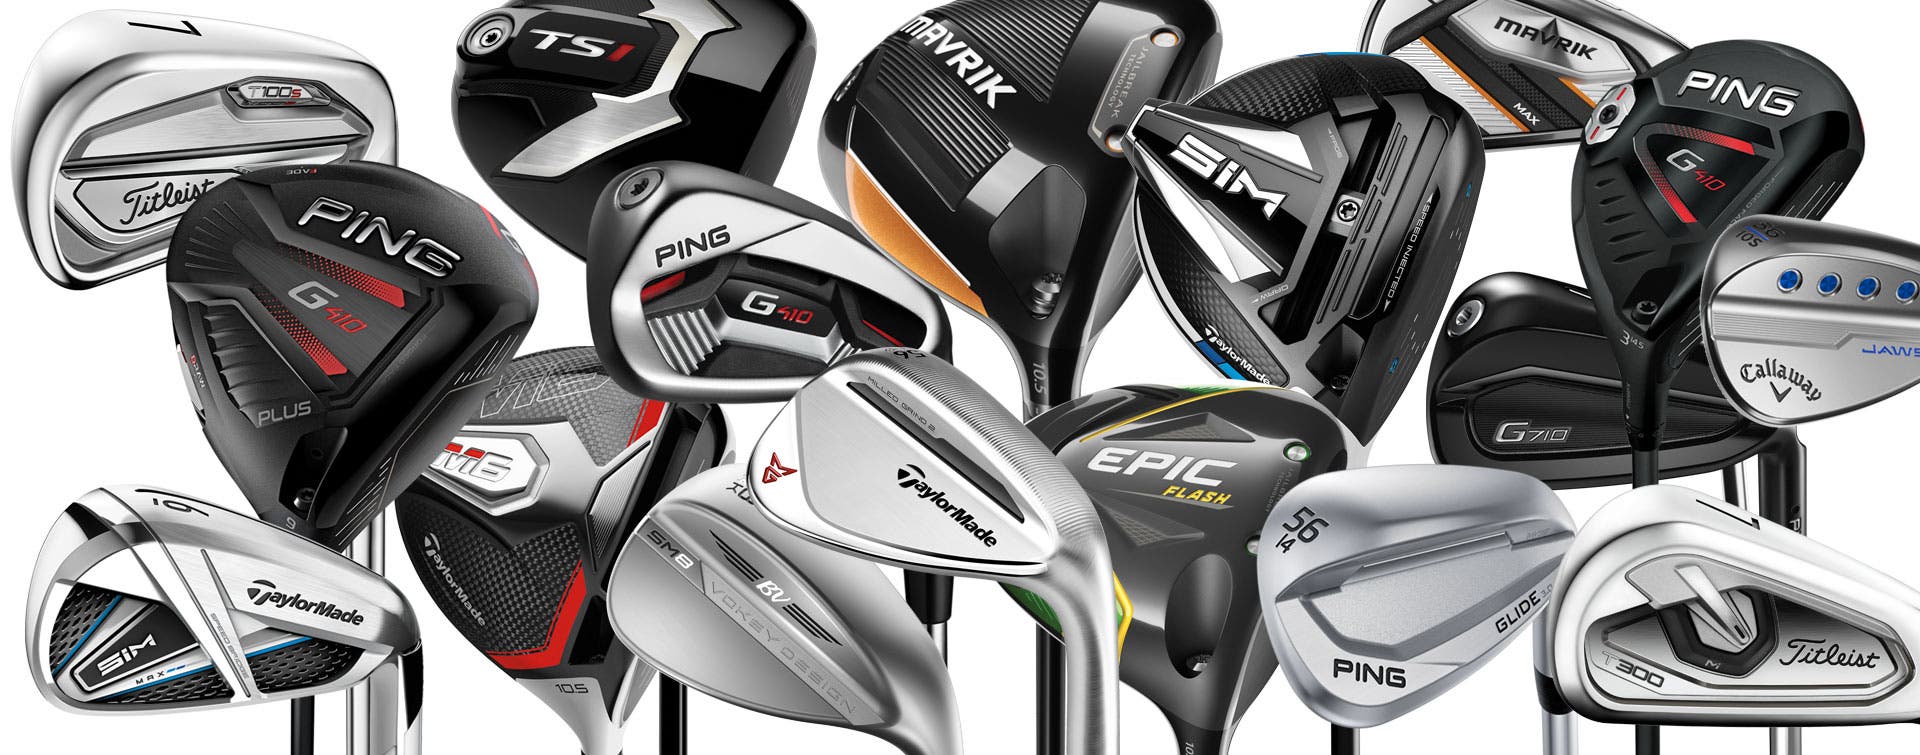 Preowned Golf Clubs